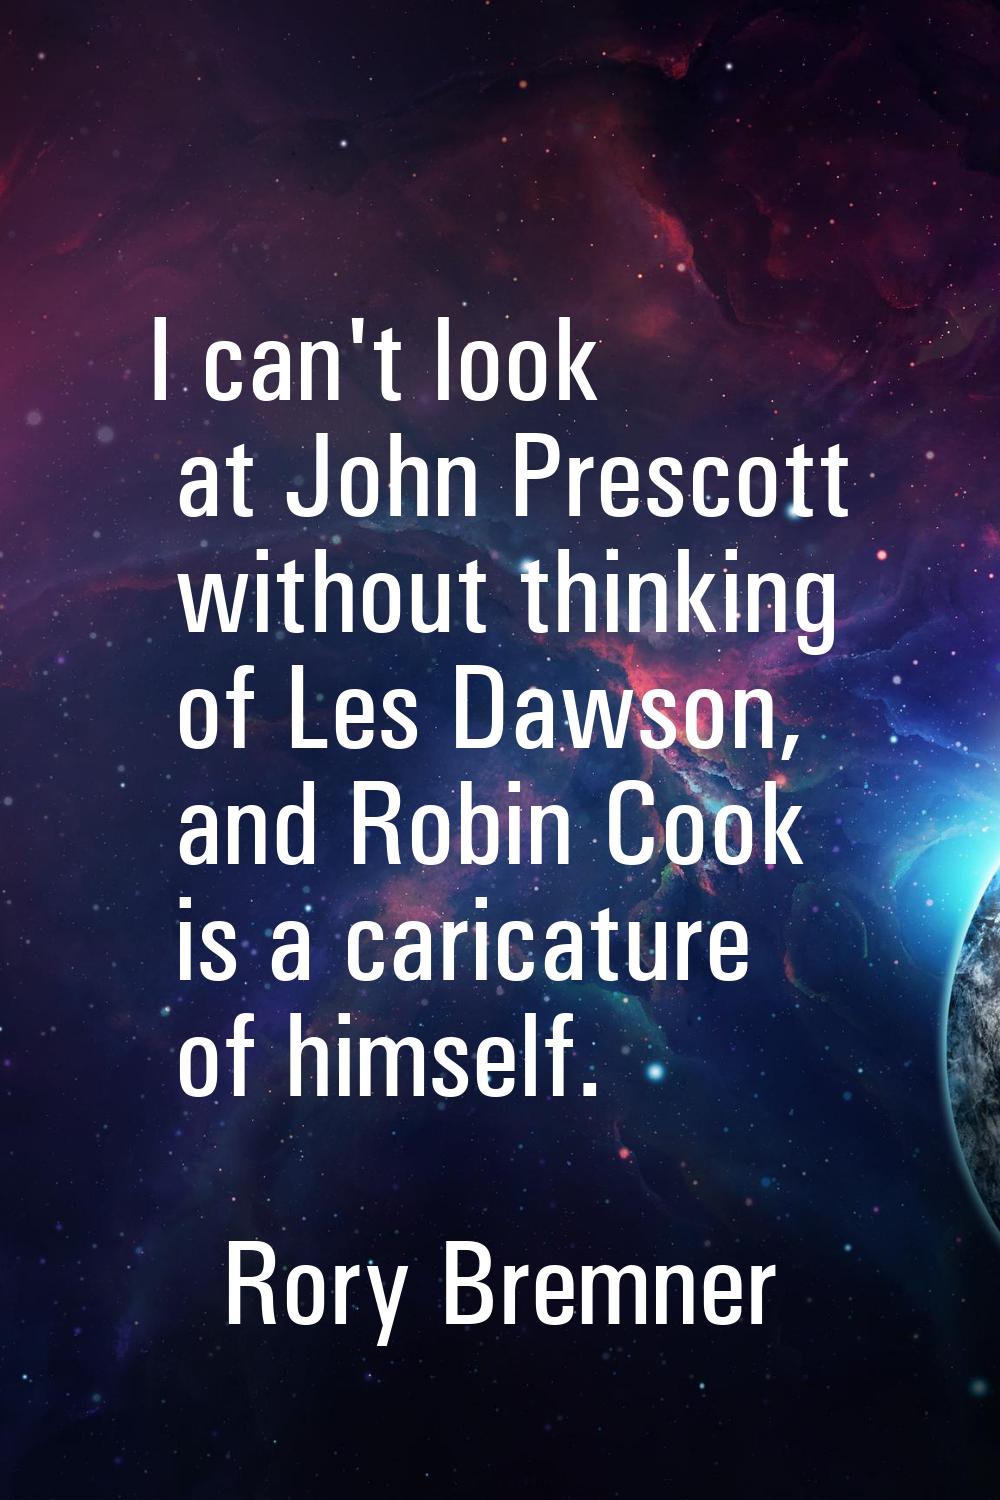 I can't look at John Prescott without thinking of Les Dawson, and Robin Cook is a caricature of him